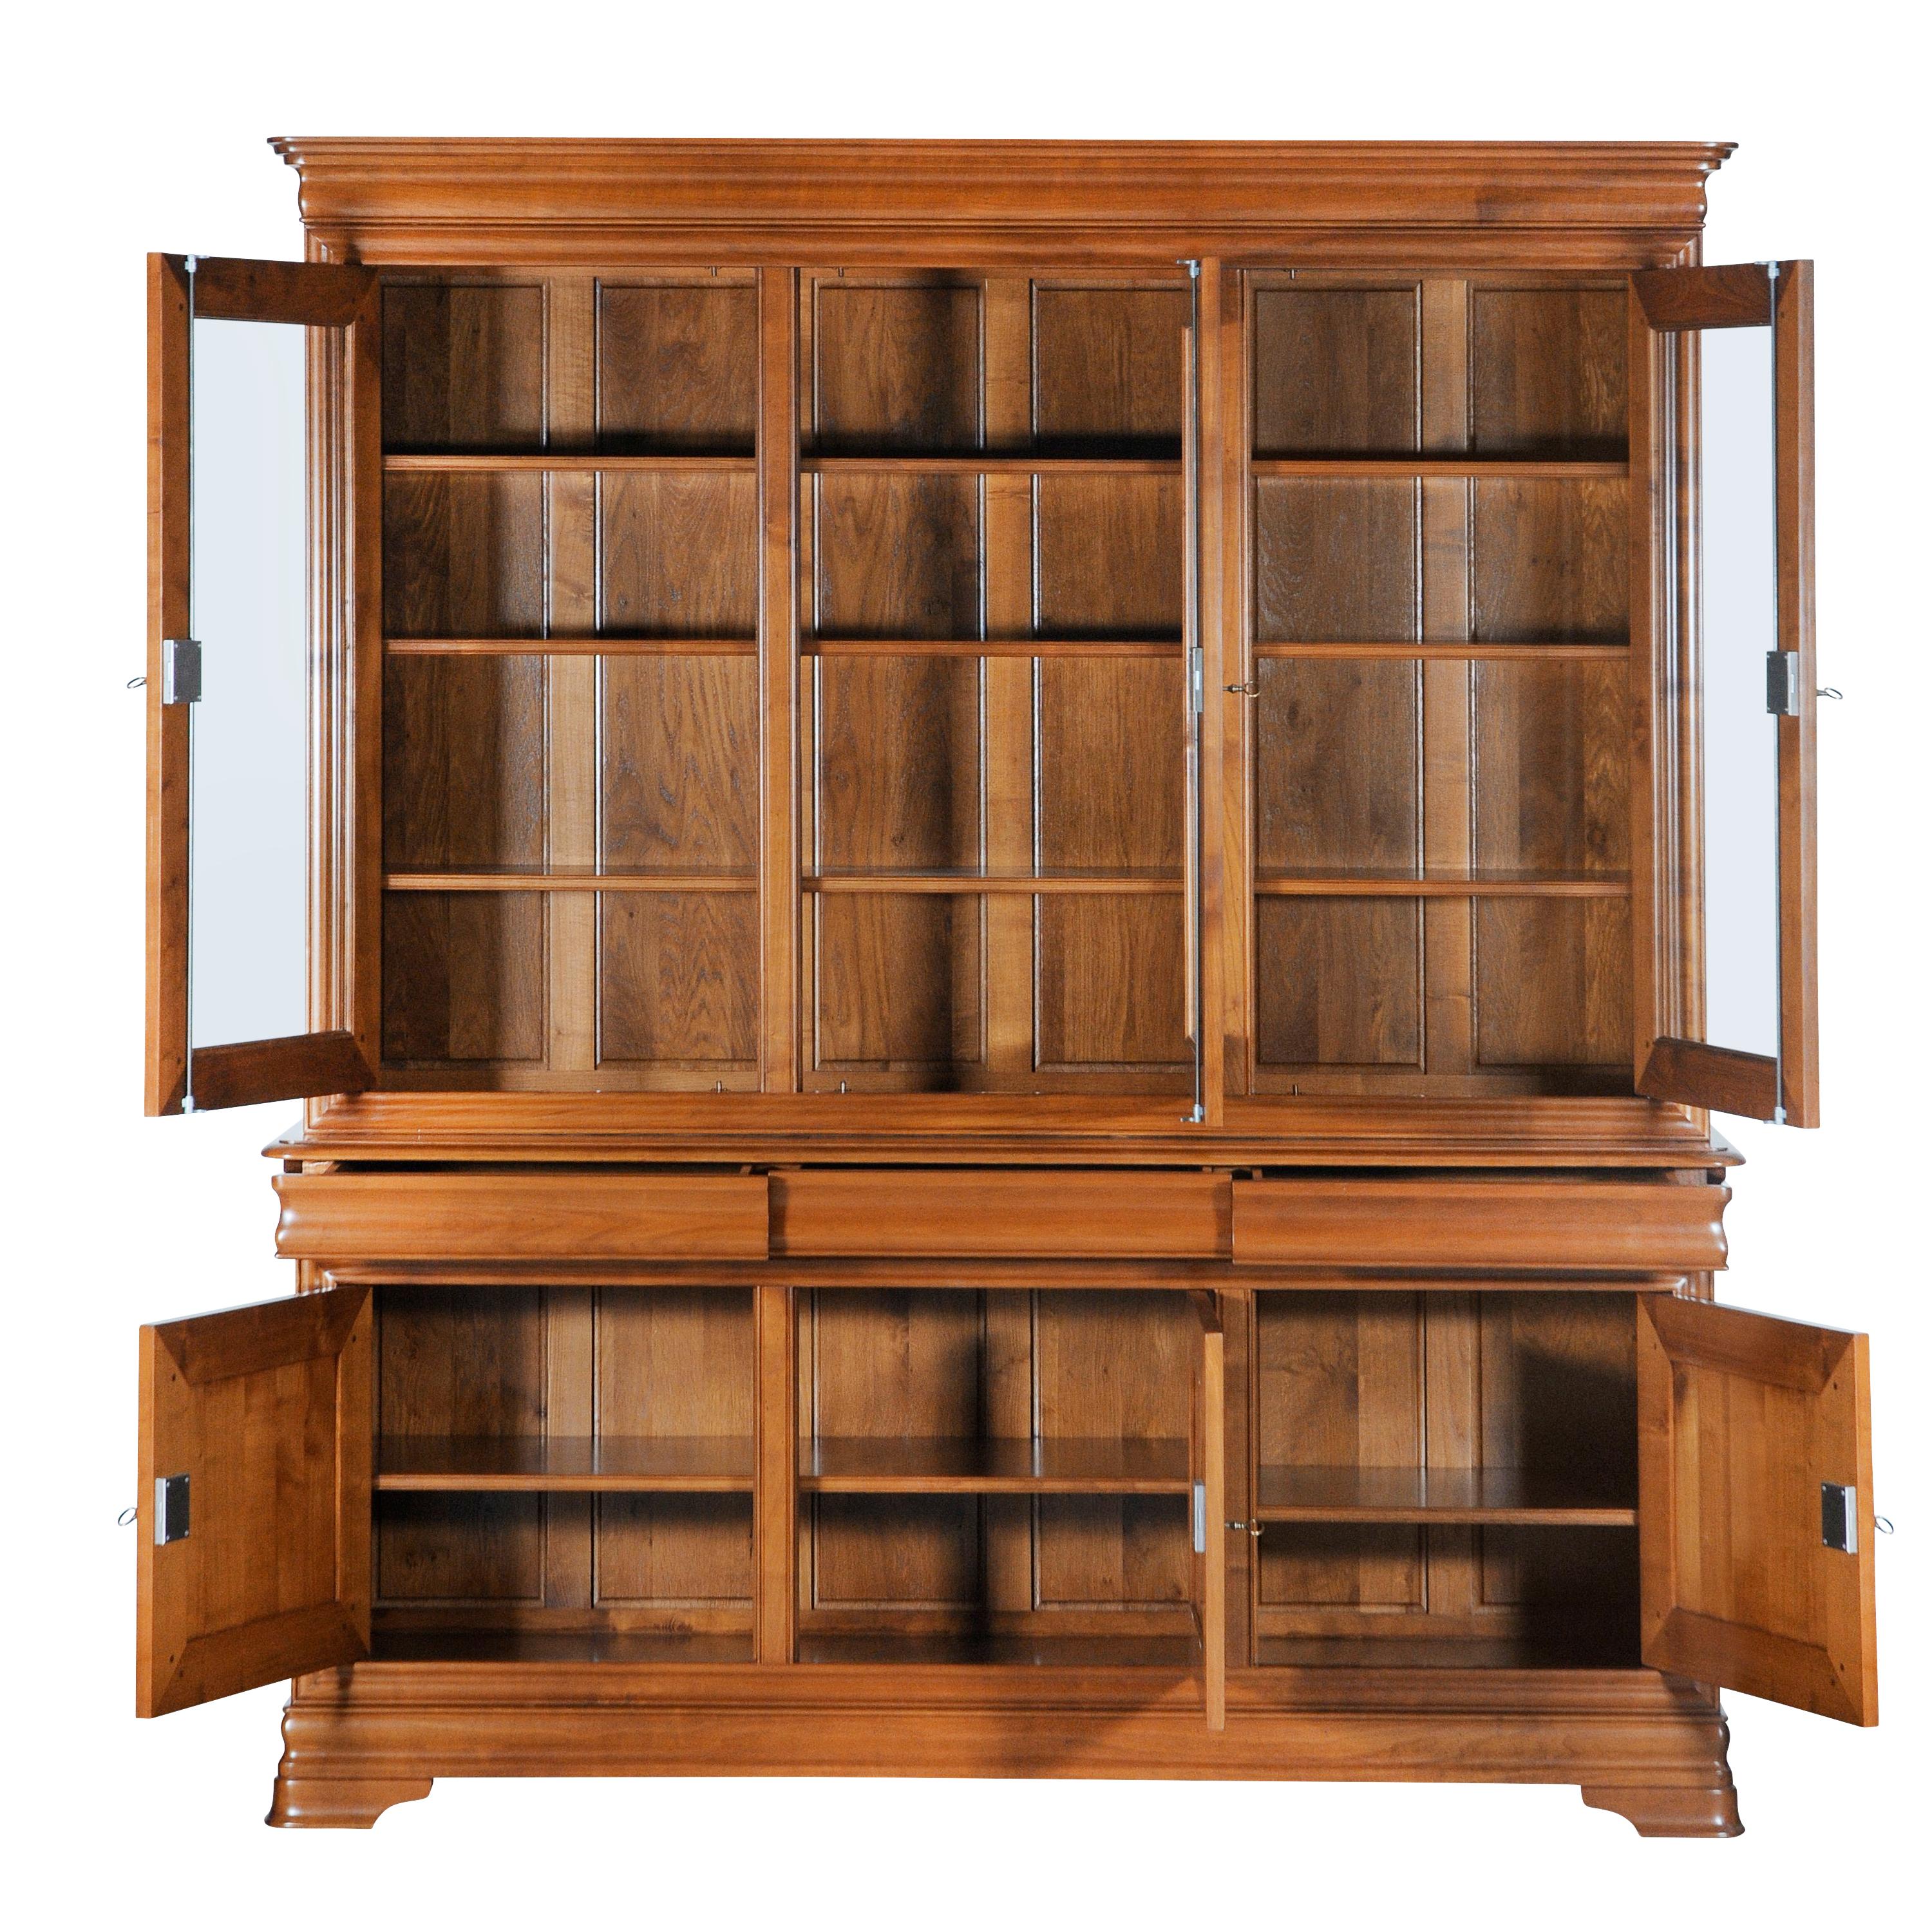 This bookcase is made with 2 parts is made of French cherrywood and also available in oak. 

- The Upper part has 3 glass doors and 3 removable shelves on wooden racks.

- The Lower part has 3 plain and solid wooden doors. 3 drawers with dovetails